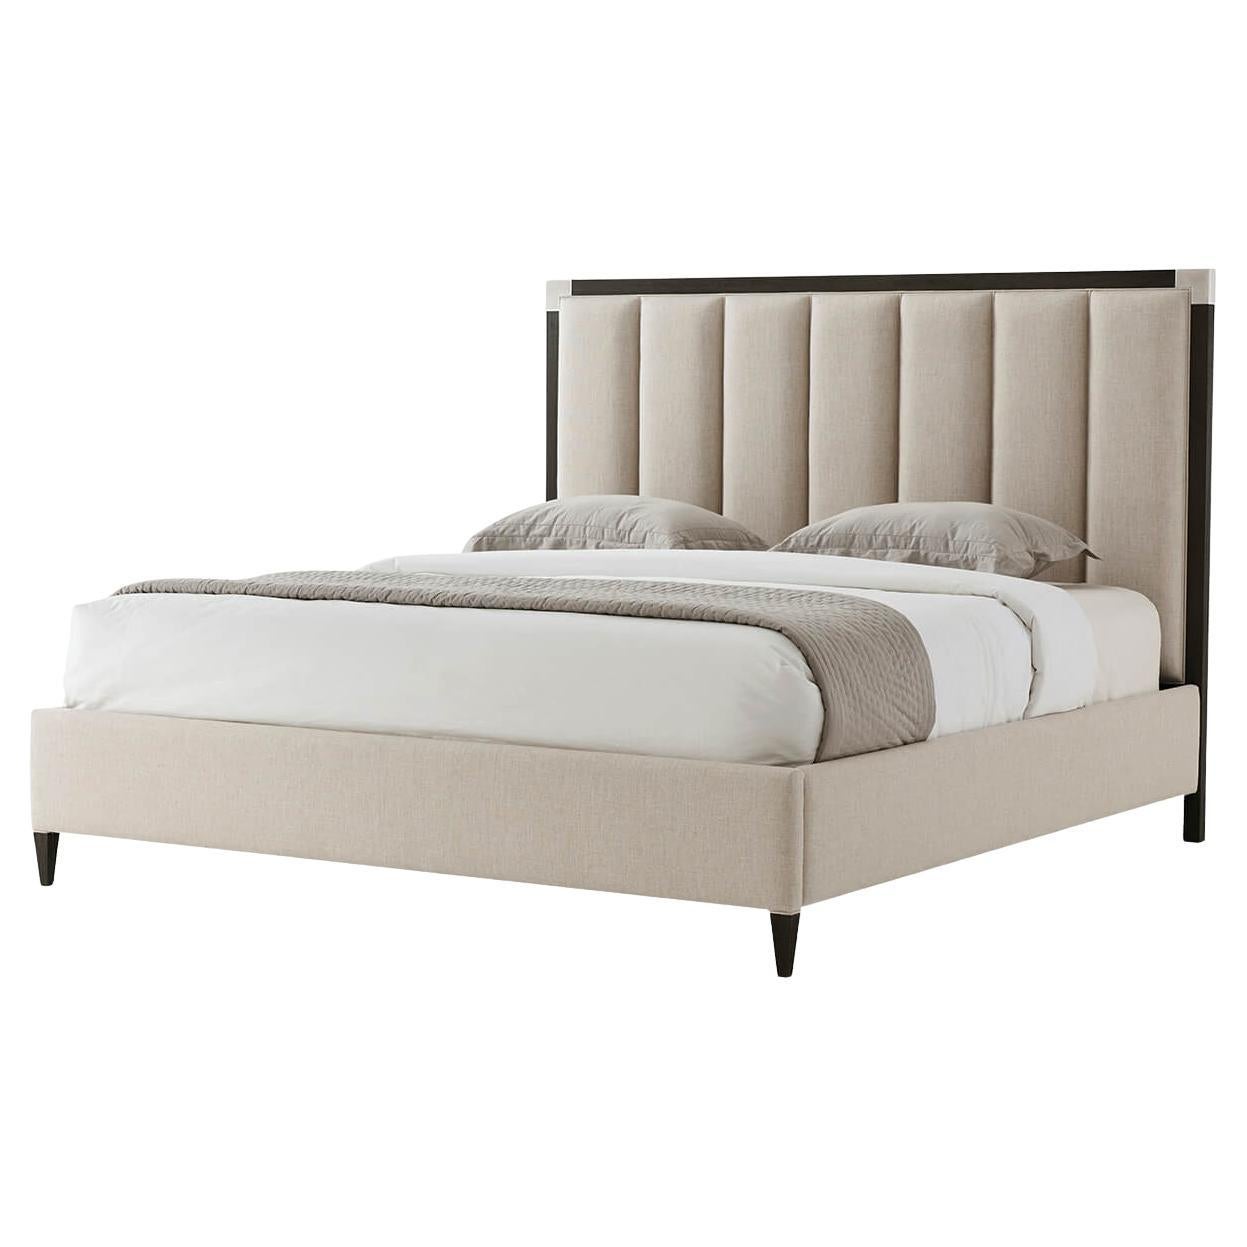 Art Deco Style King Size Bed